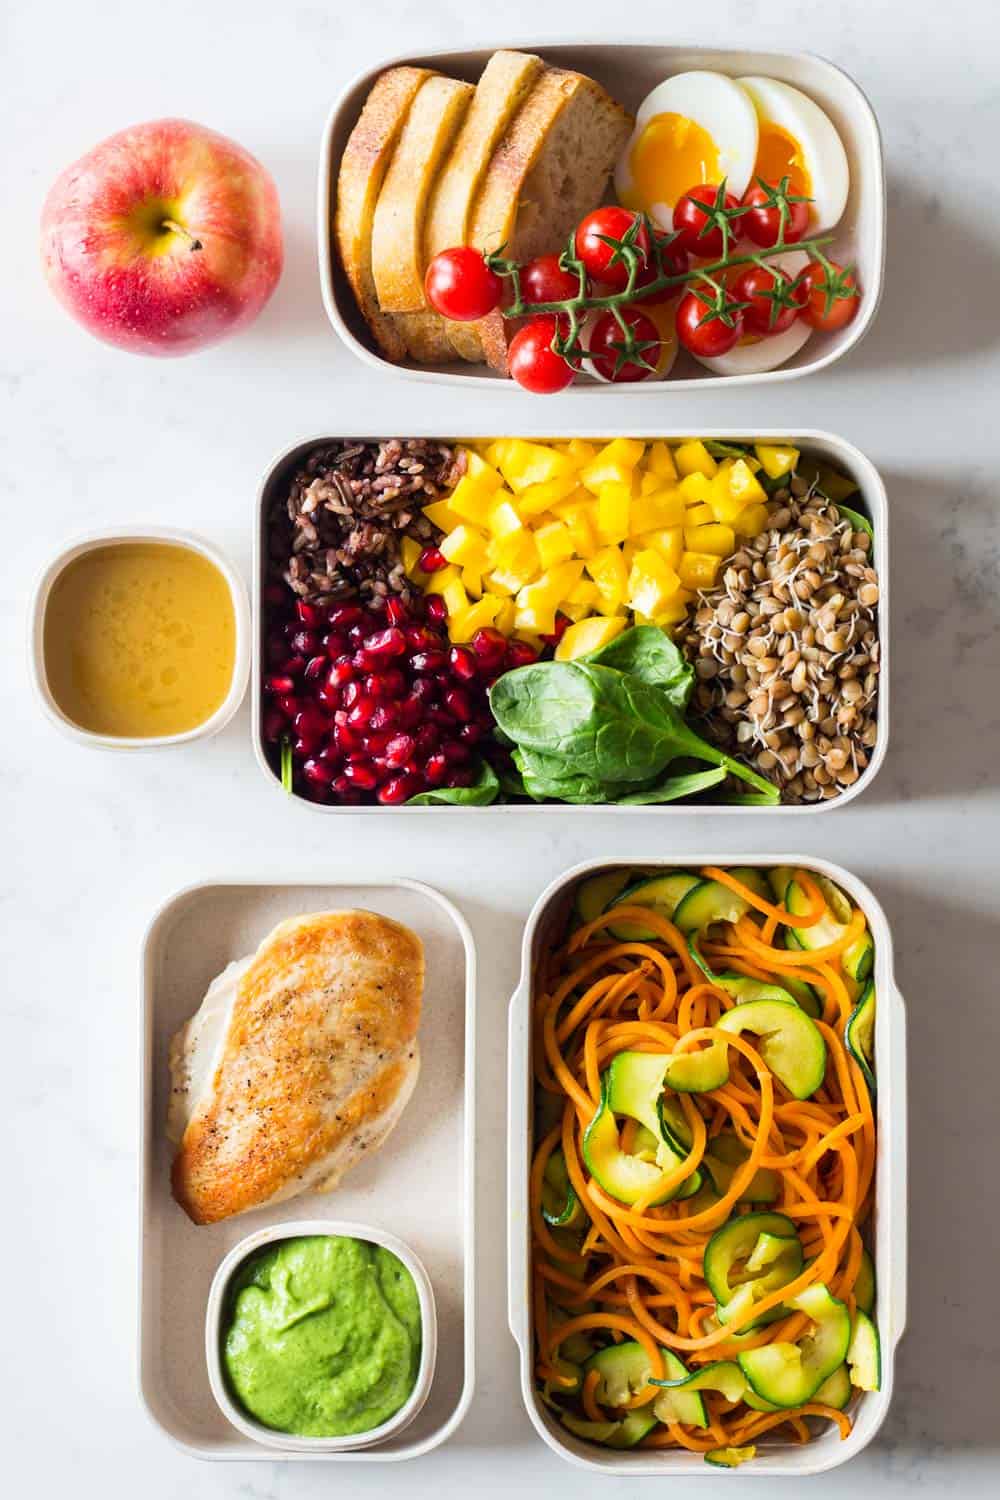 Several Meal Prep Containers showcasing the food for the Clean eating meal plan